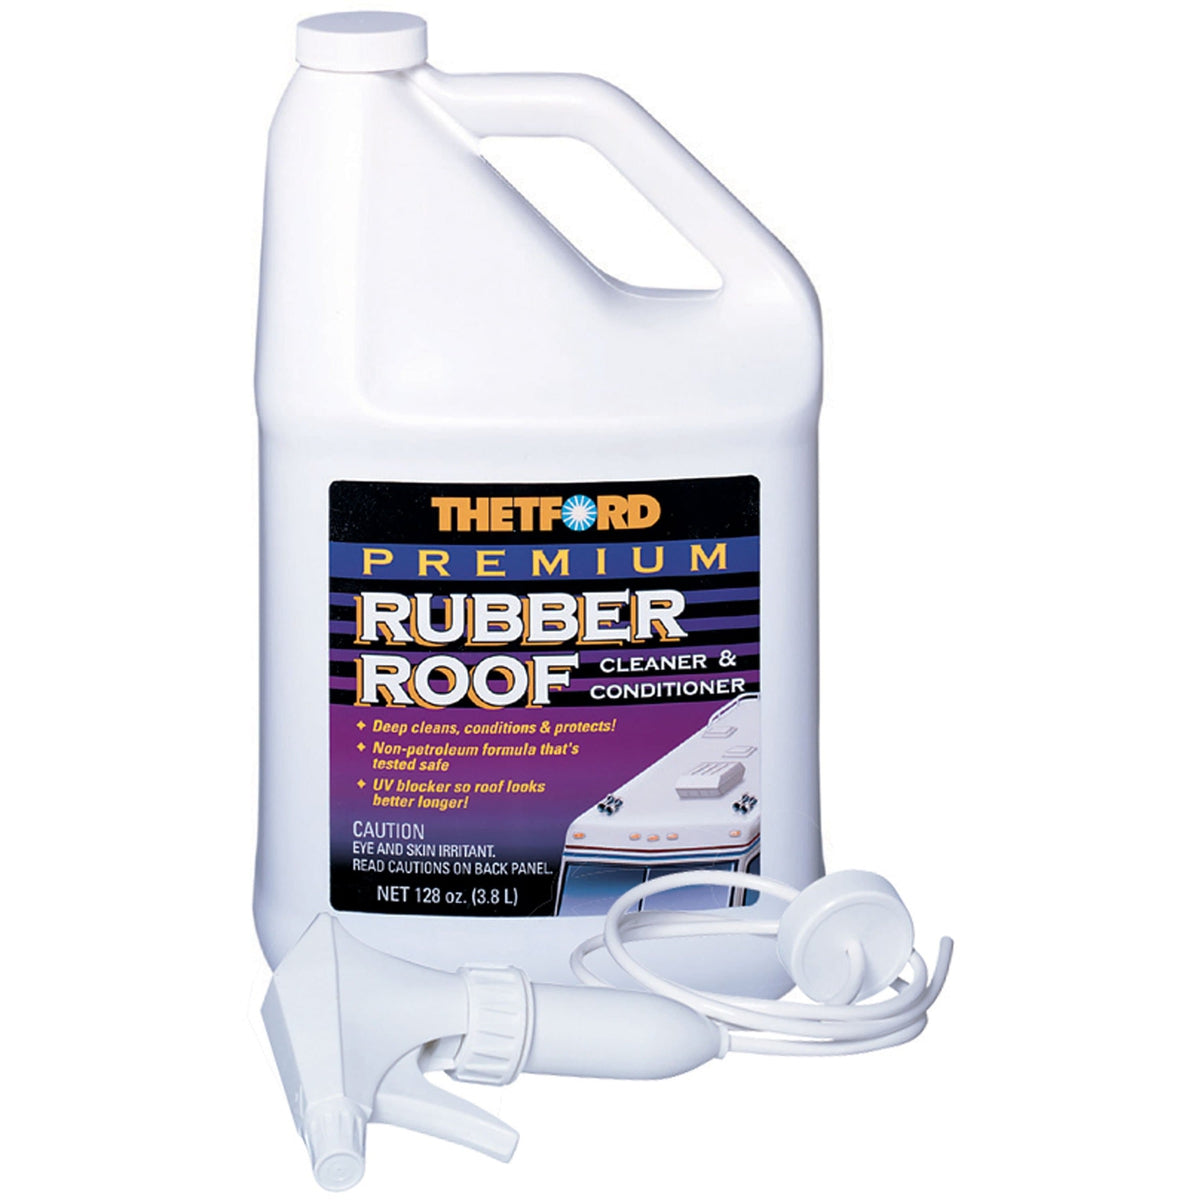 Thetford Premium RV Rubber Roof Cleaner and Conditioner-Gallon #32513